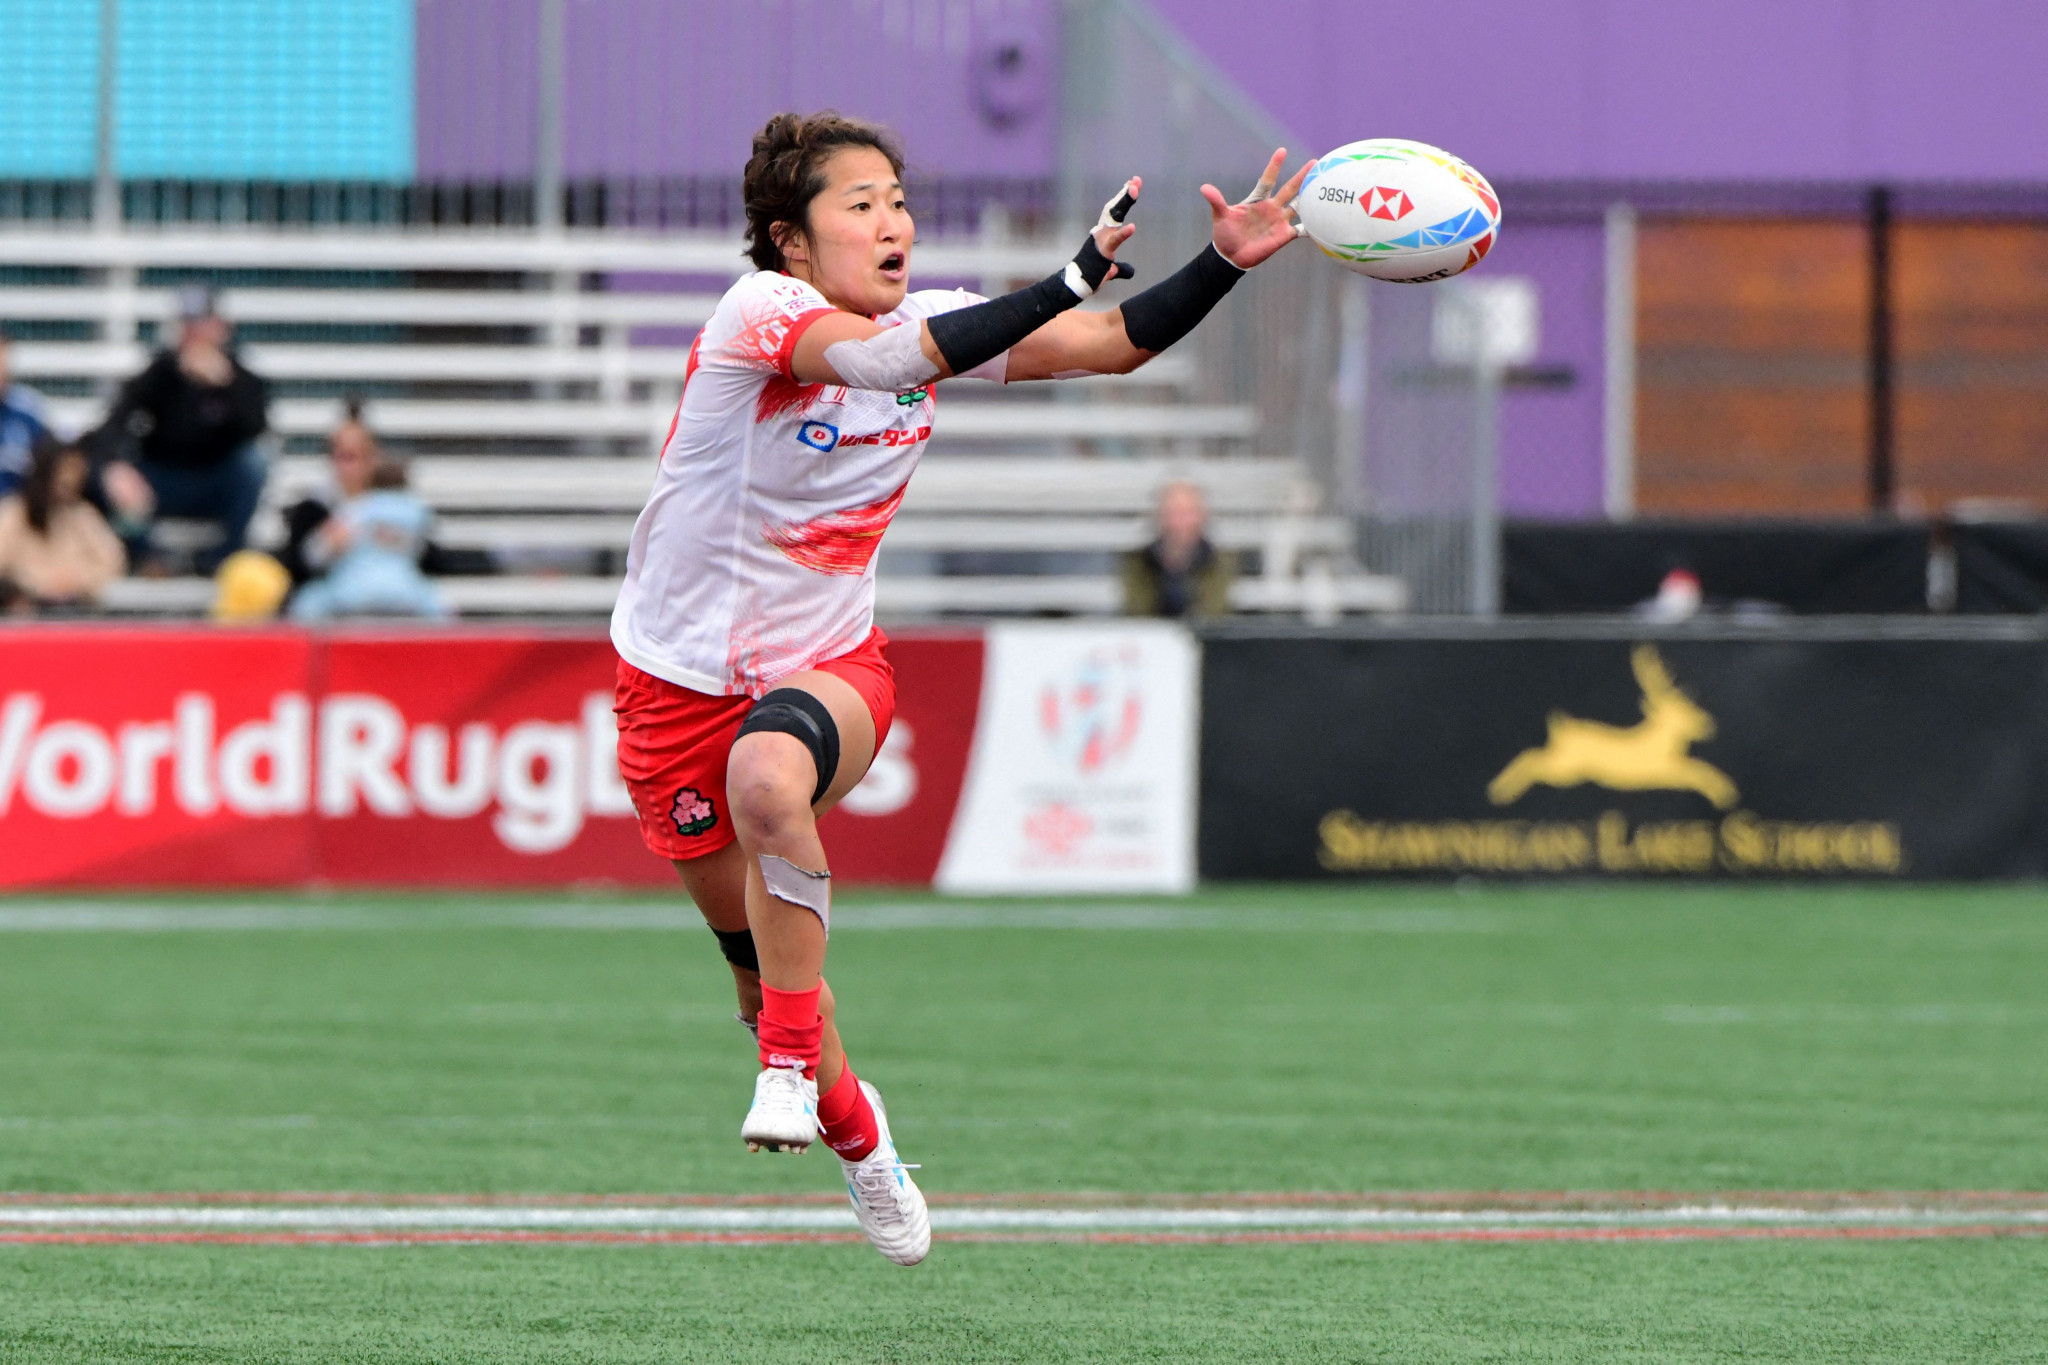 Japan's women secured promotion to the World Rugby Sevens Series with a win over Poland ©Getty Images